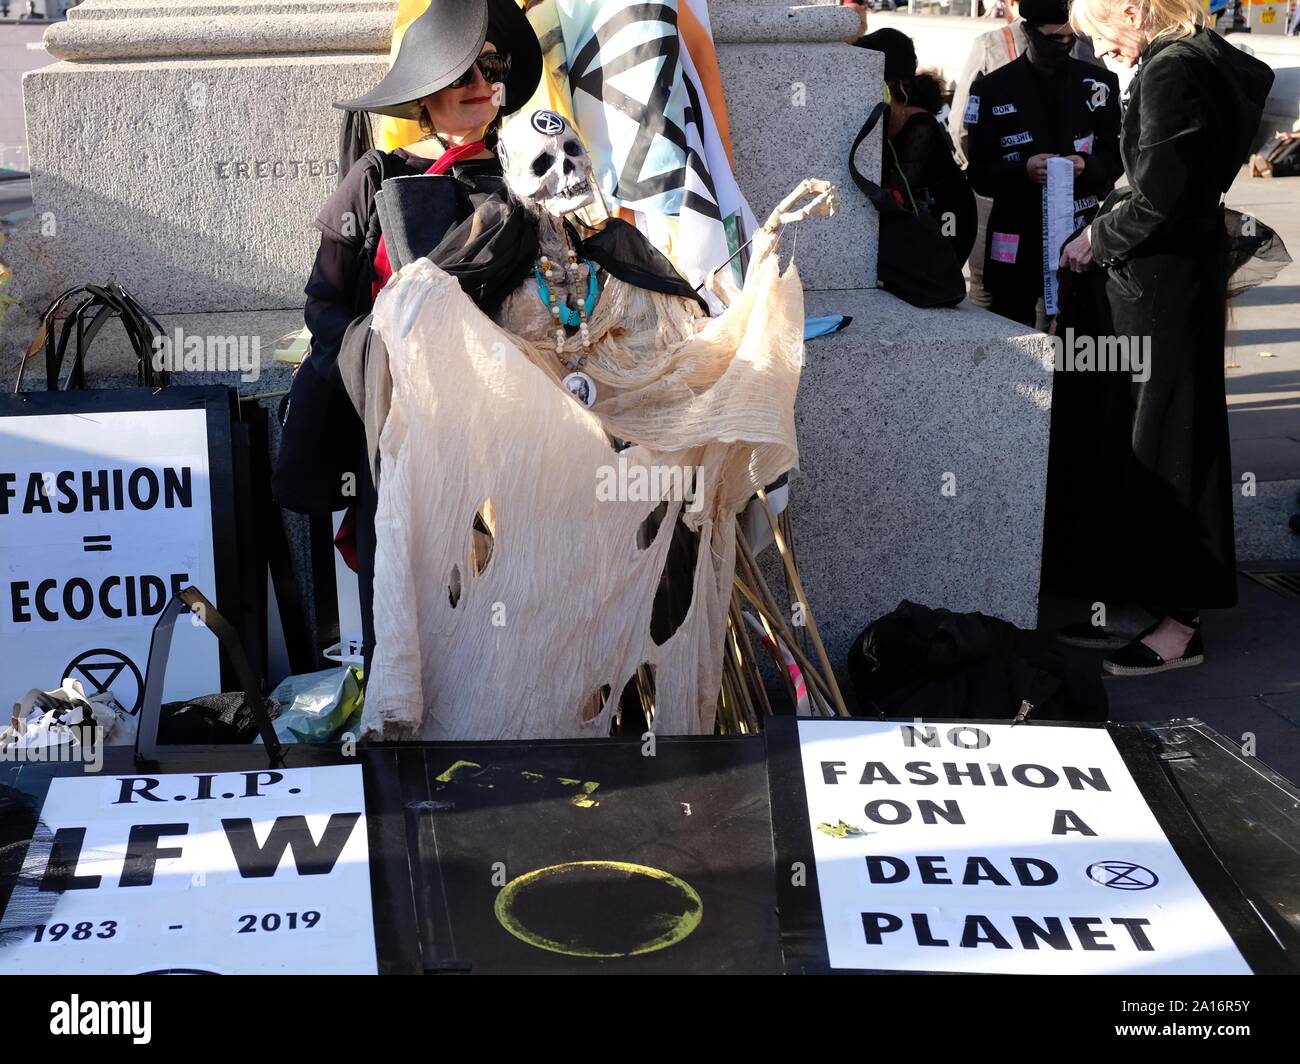 Environmental activists Extinction Rebellion at staged funeral protest against London Fashion Week in Trafalgar Square on September 17 2019 Stock Photo